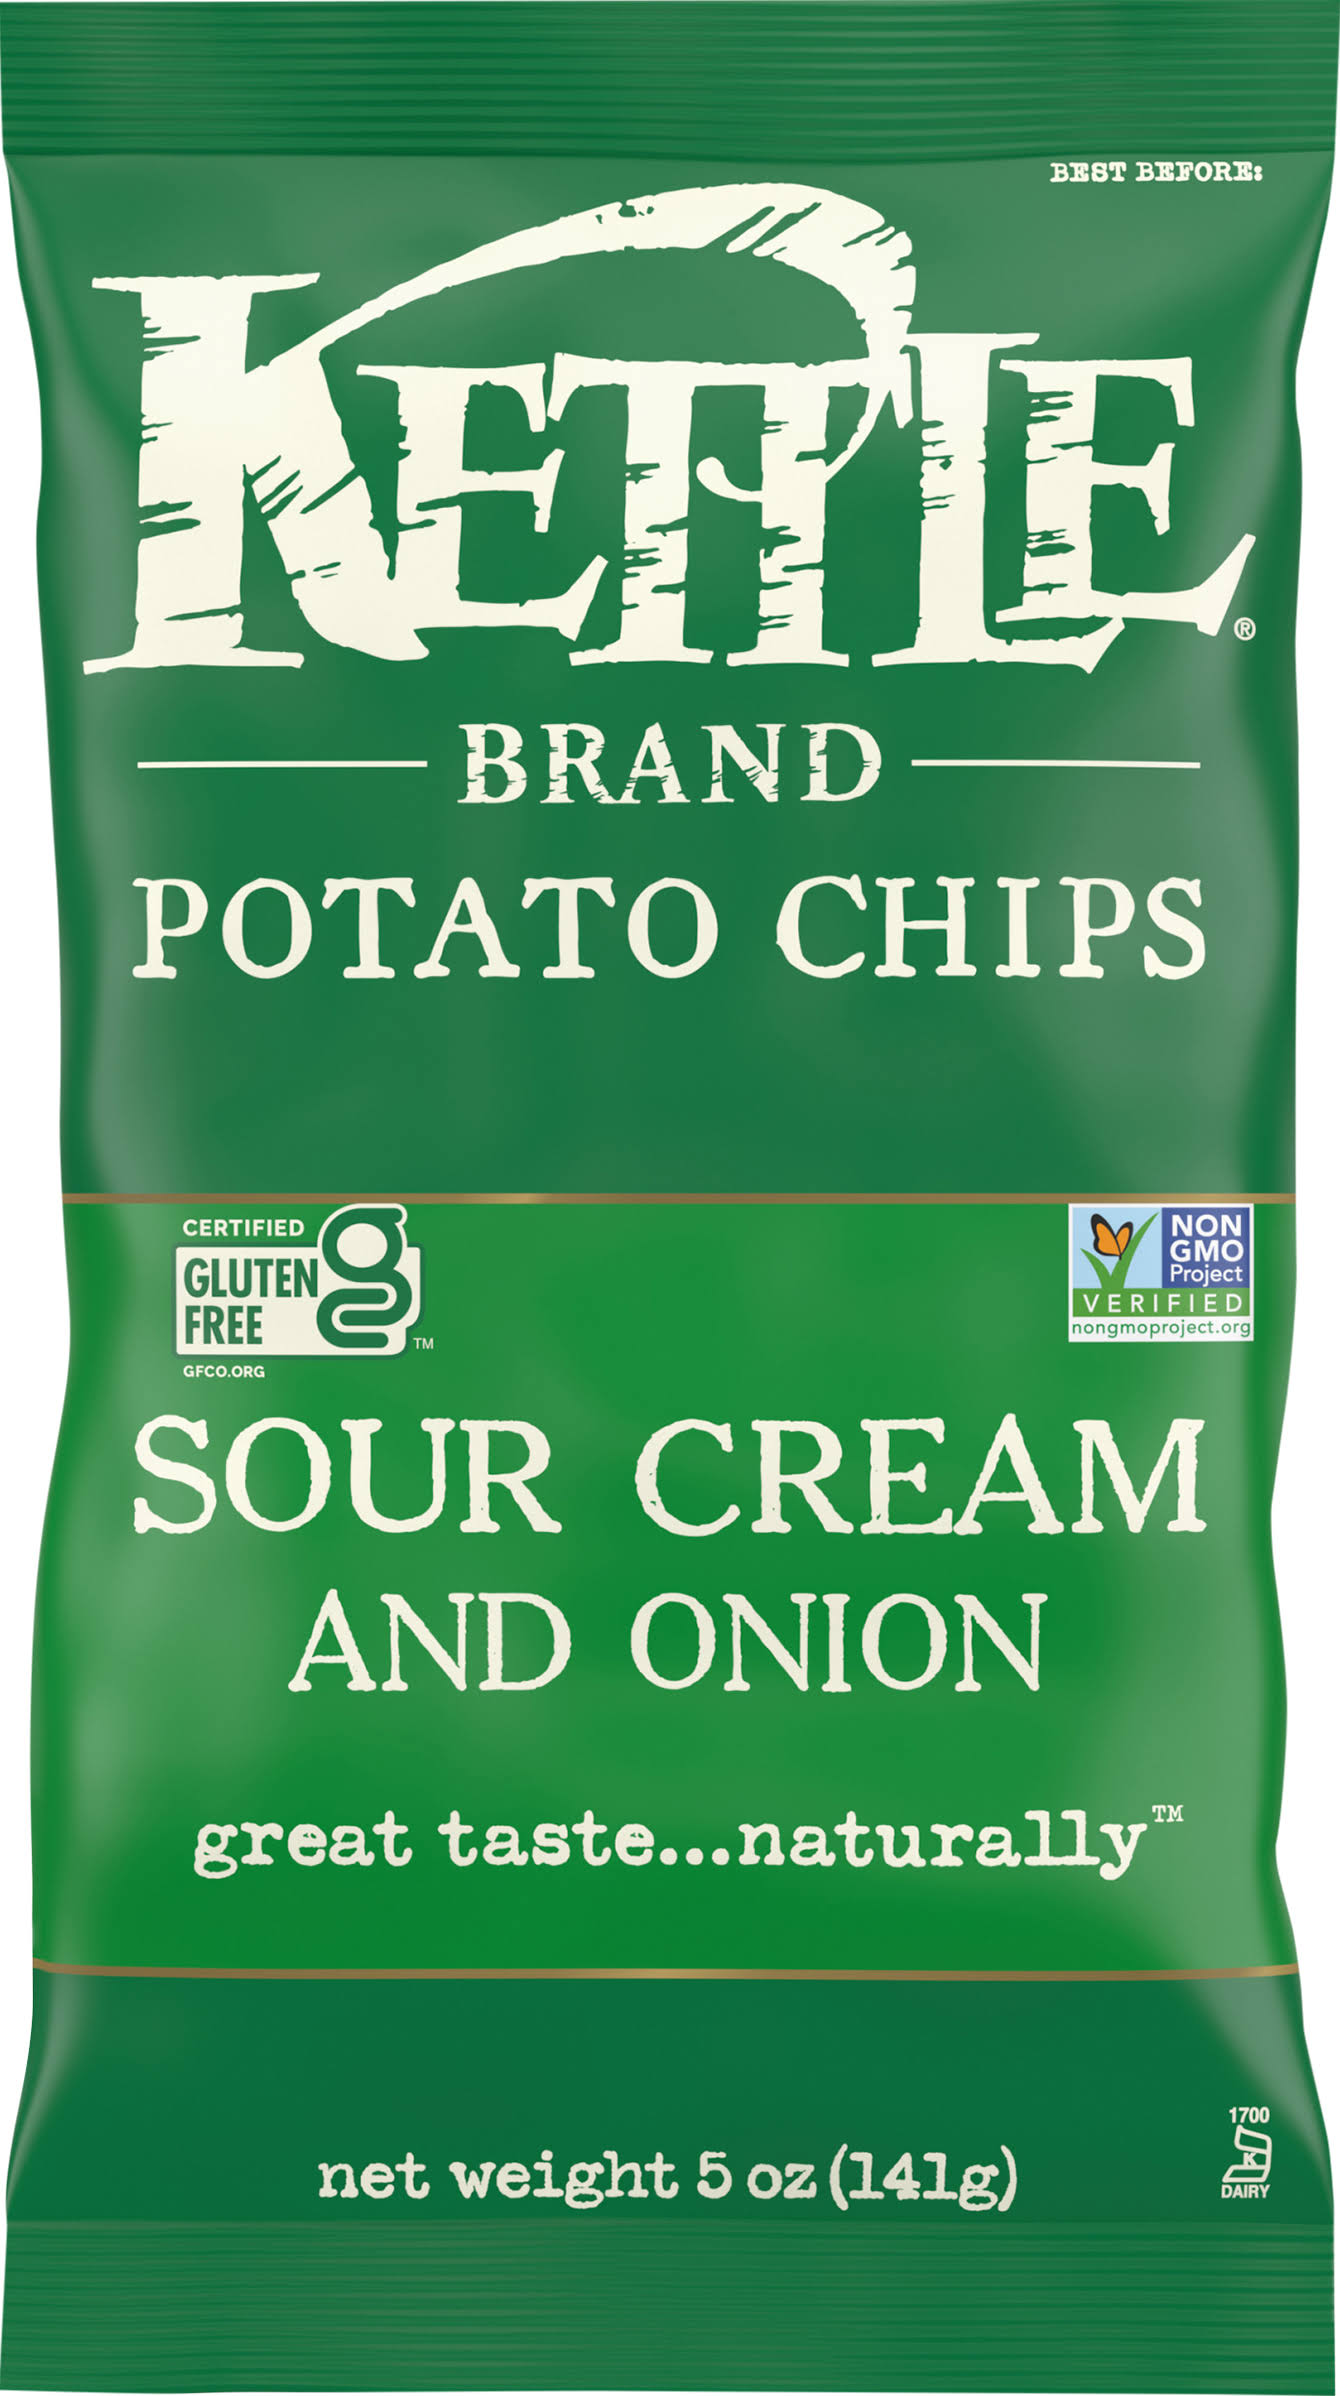 Kettle Brand Potato Chips - Sour Cream and Onion, 142g